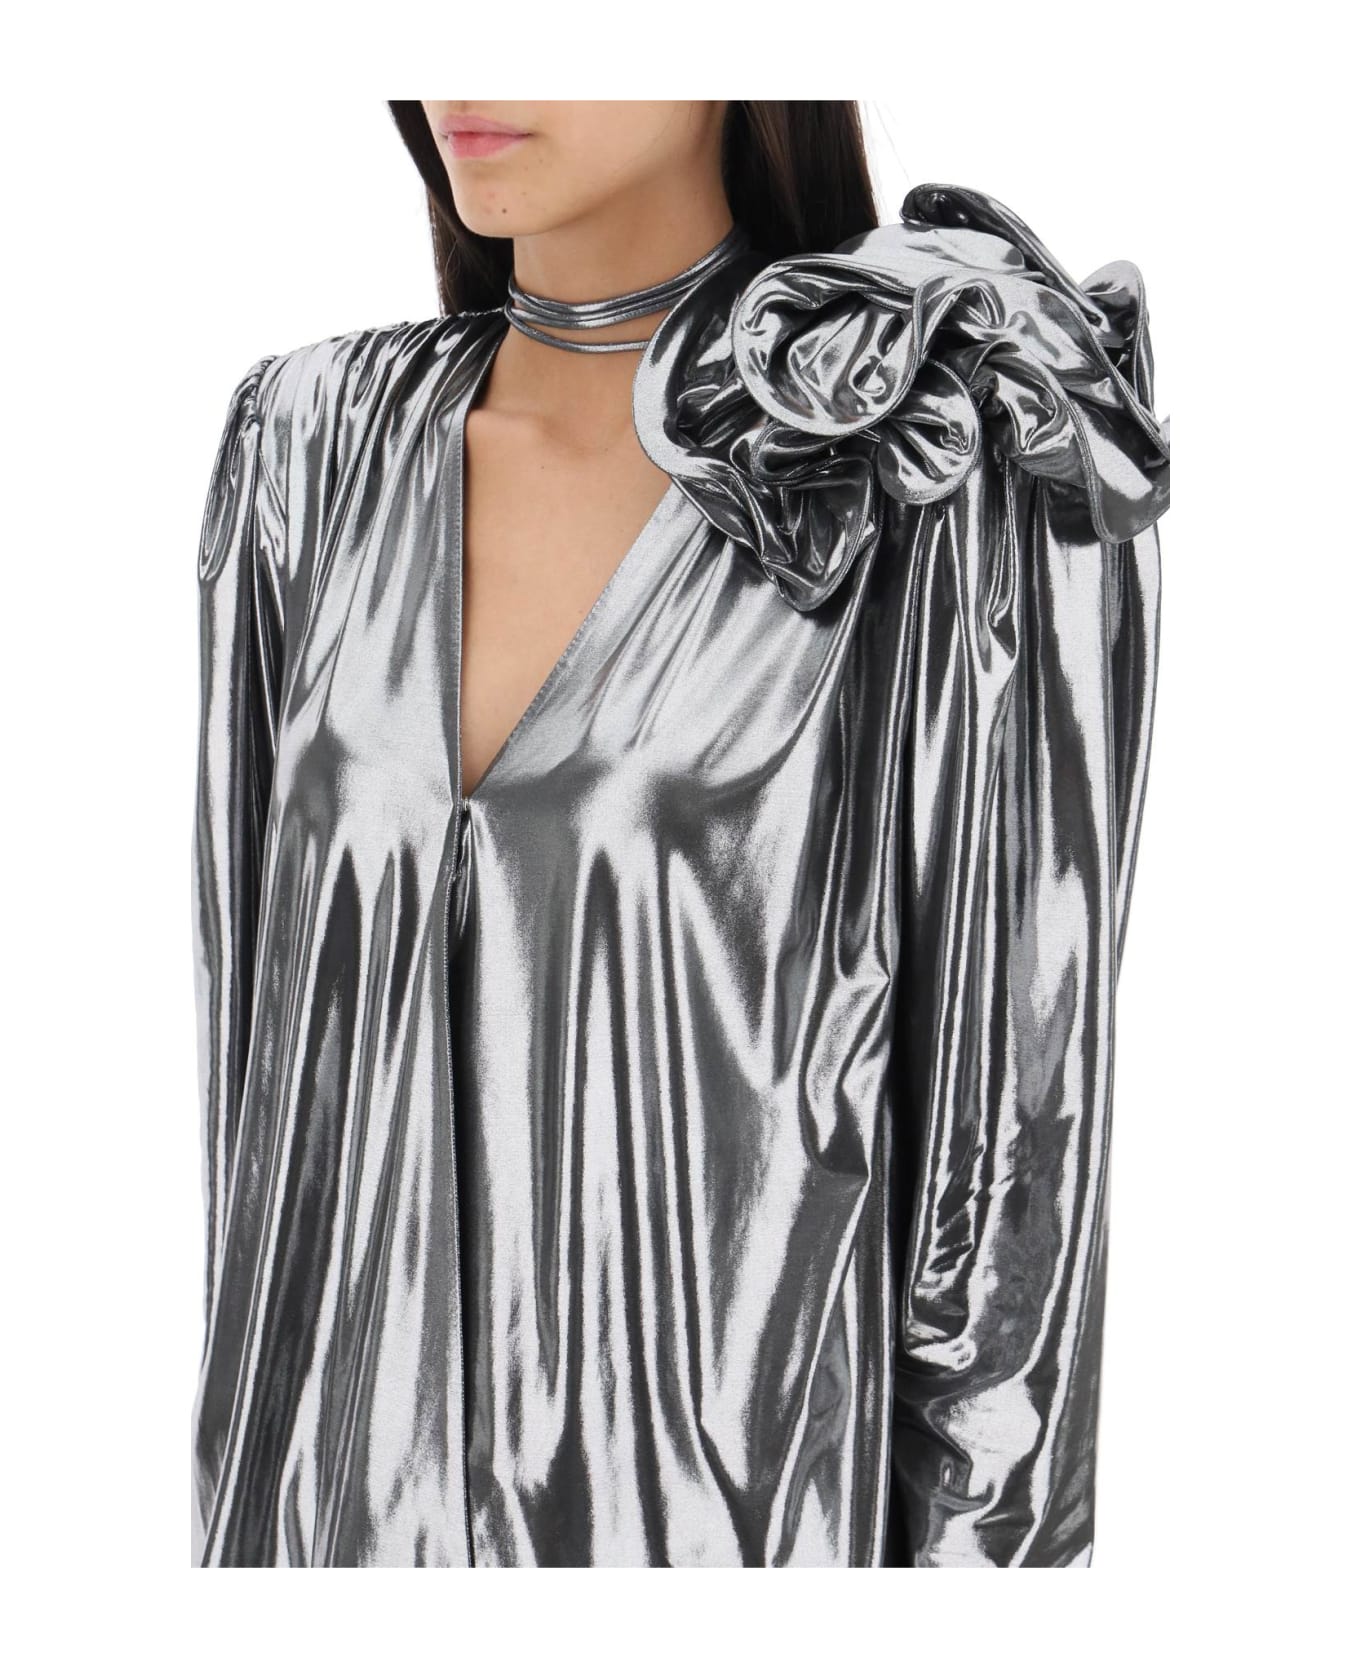 Magda Butrym Jersey Blouse With Rose Applique - SILVER (Silver)